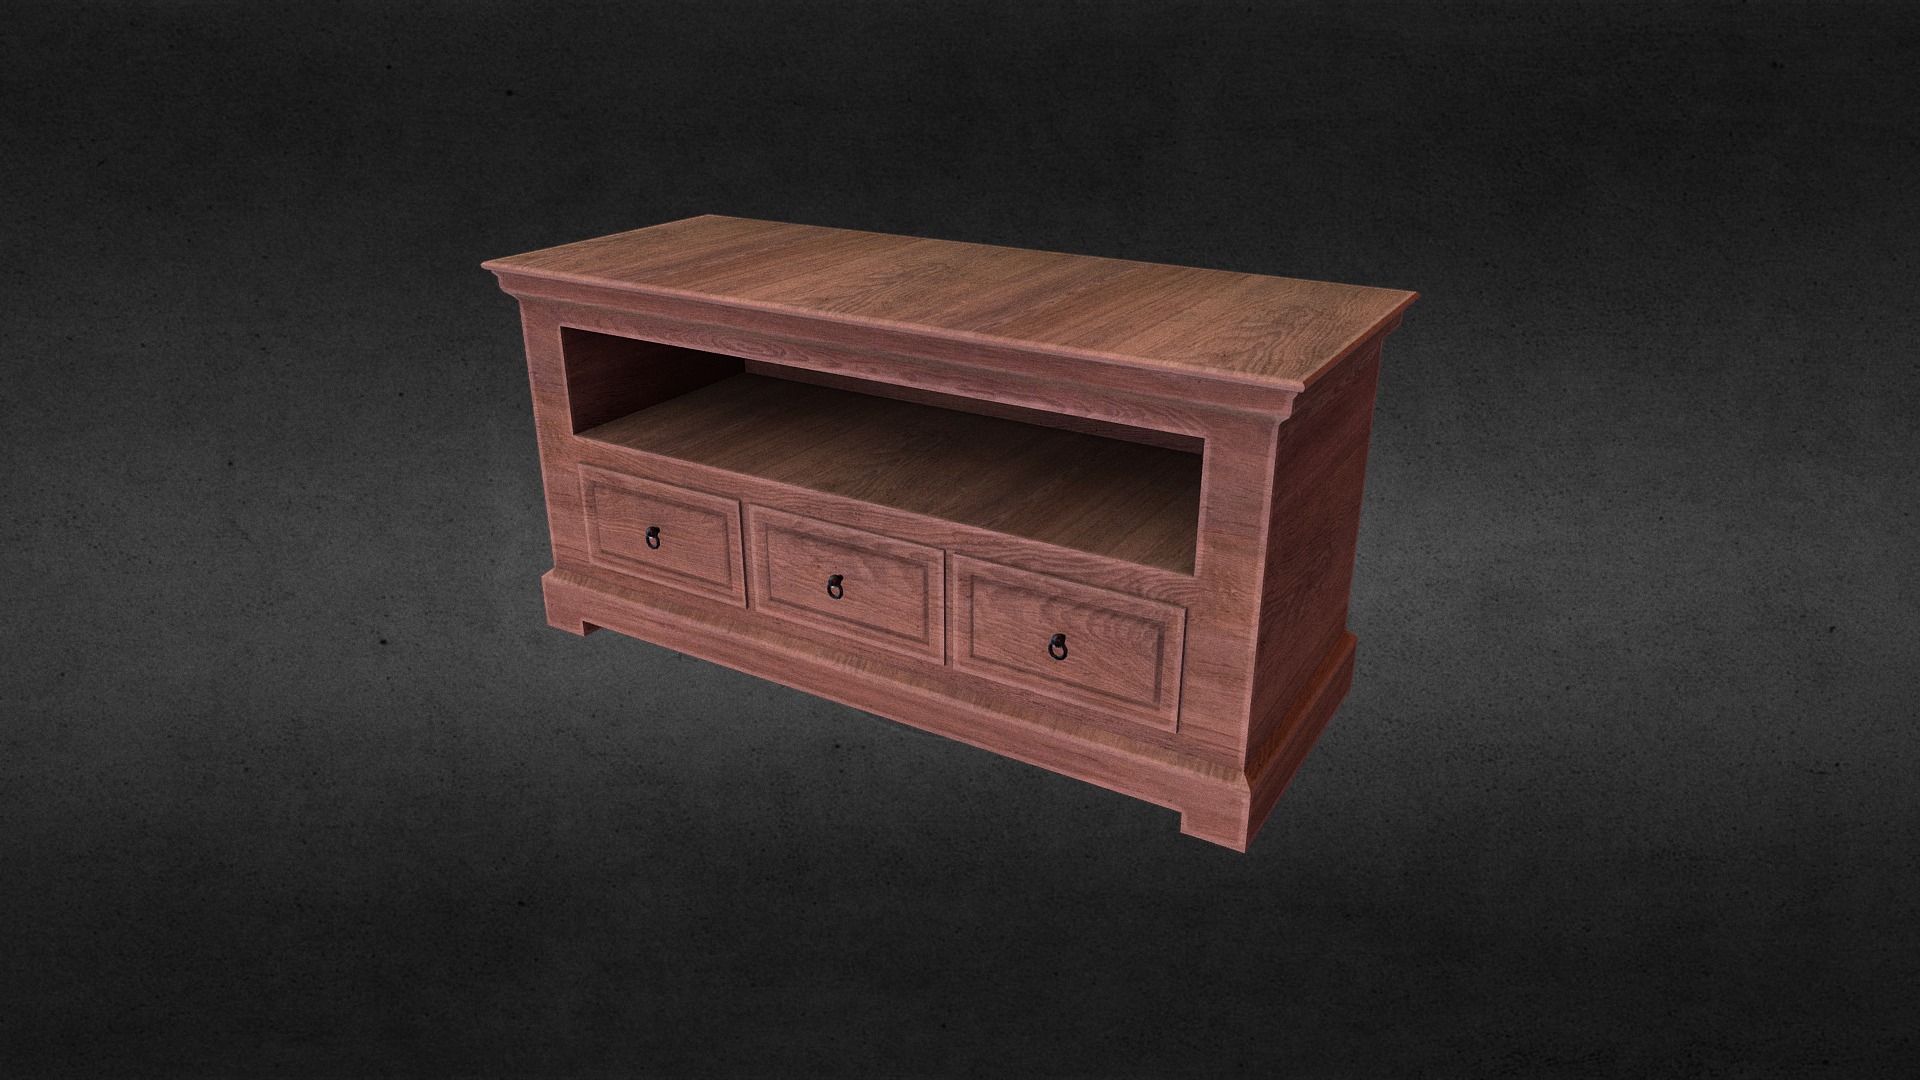 3D model TV Commode - This is a 3D model of the TV Commode. The 3D model is about a wooden box on a black surface.